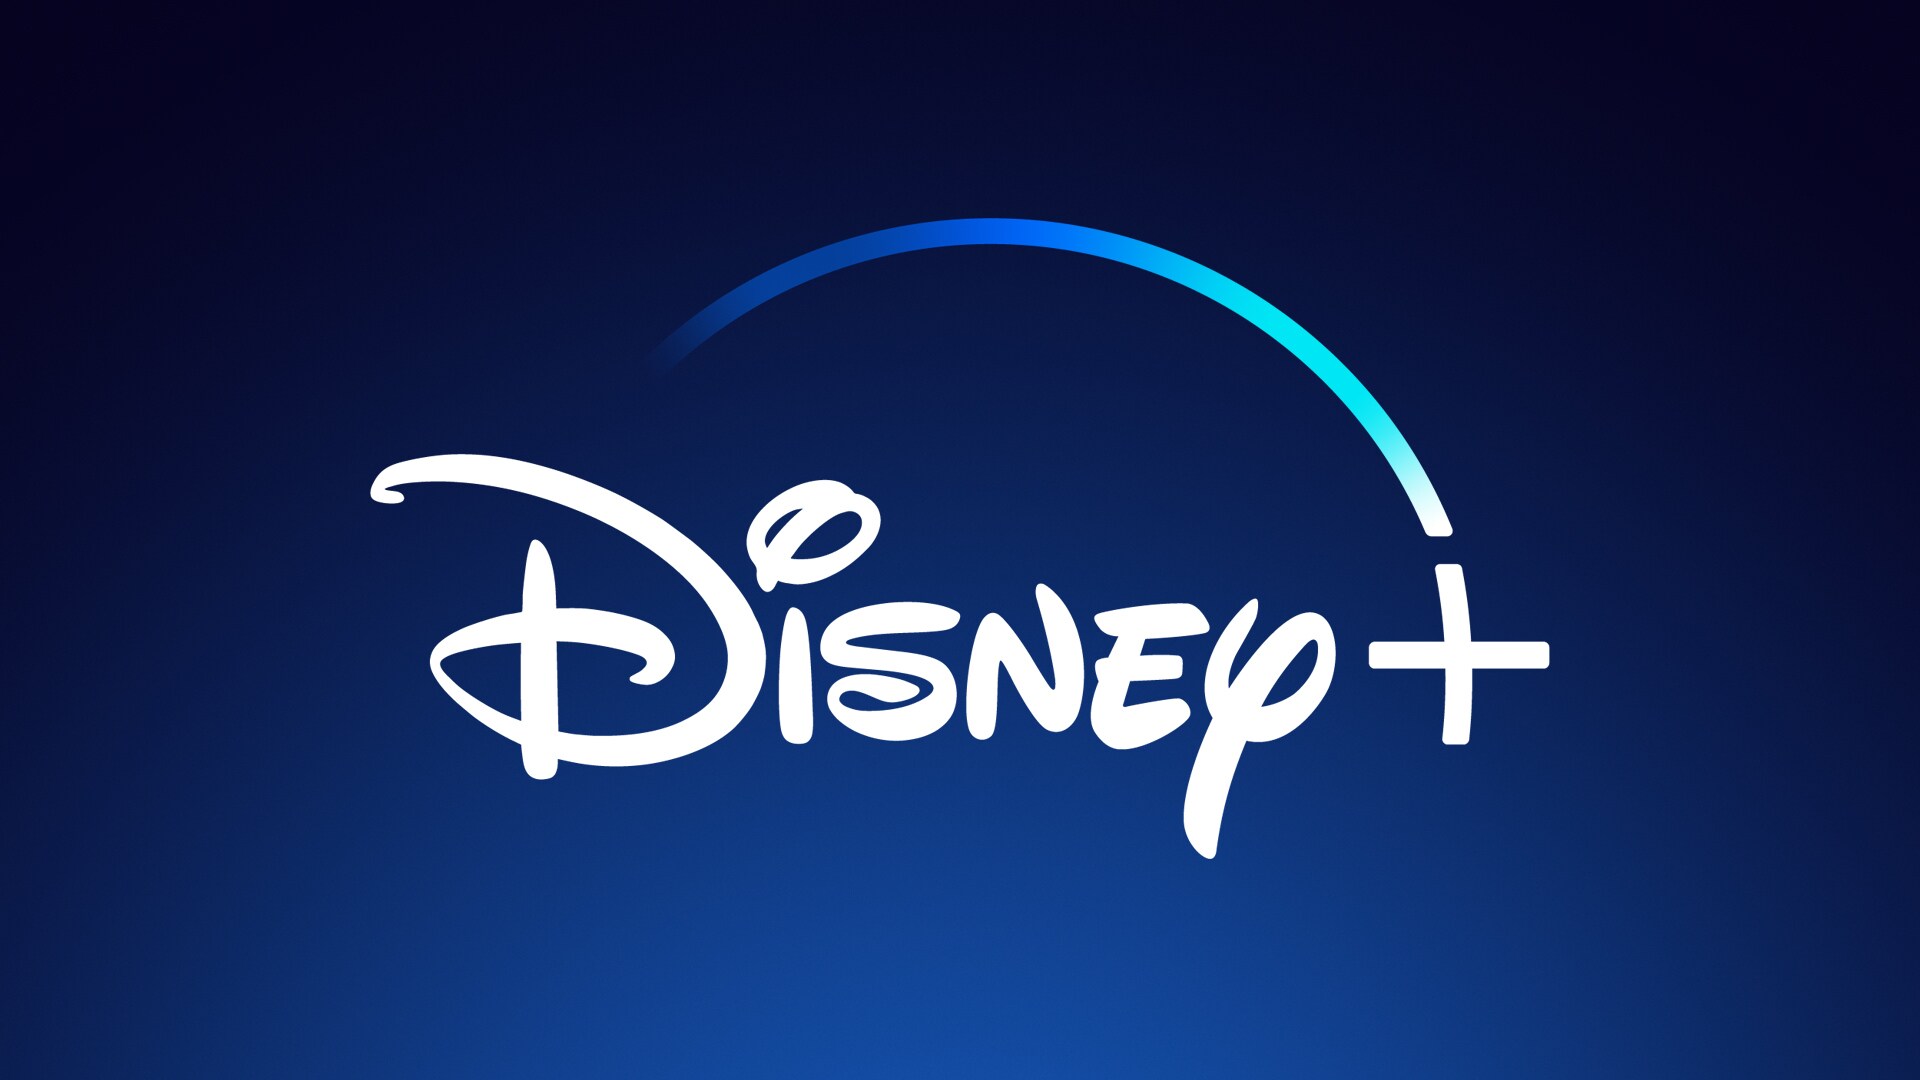 “Summer Of Disney+” Brings Family Adventures All Summer Long With Hit Movies, Original Series, And Documentaries